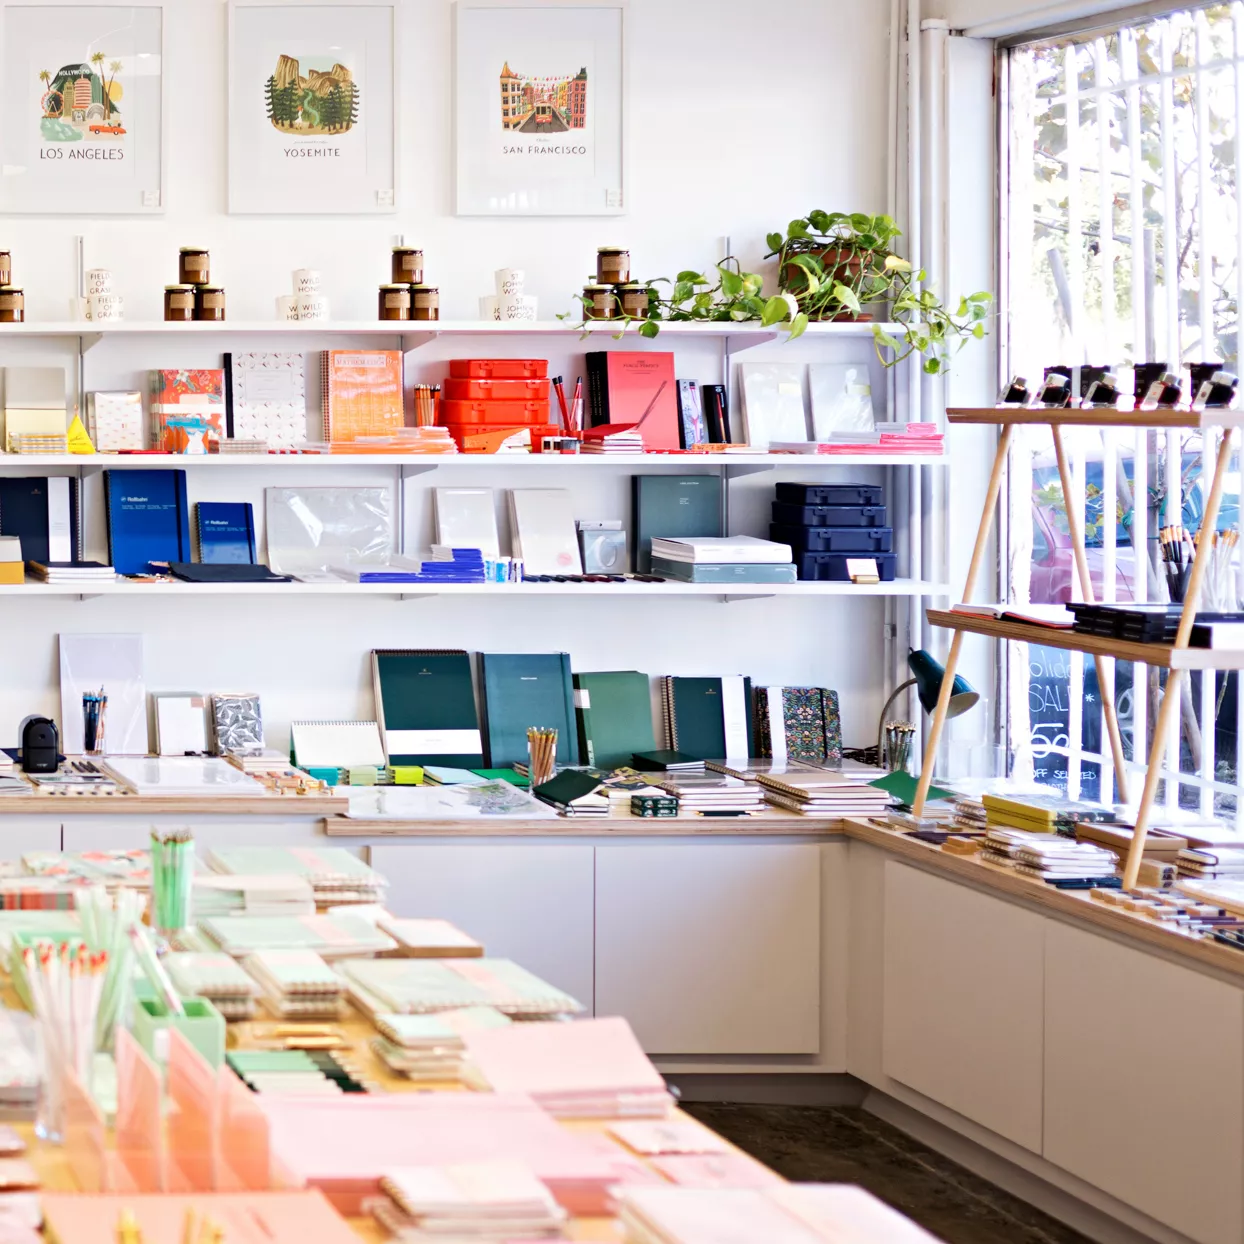 These Stationery Shops Help You Stock Up on Everything from Cards to Art Supplies and Notebooks